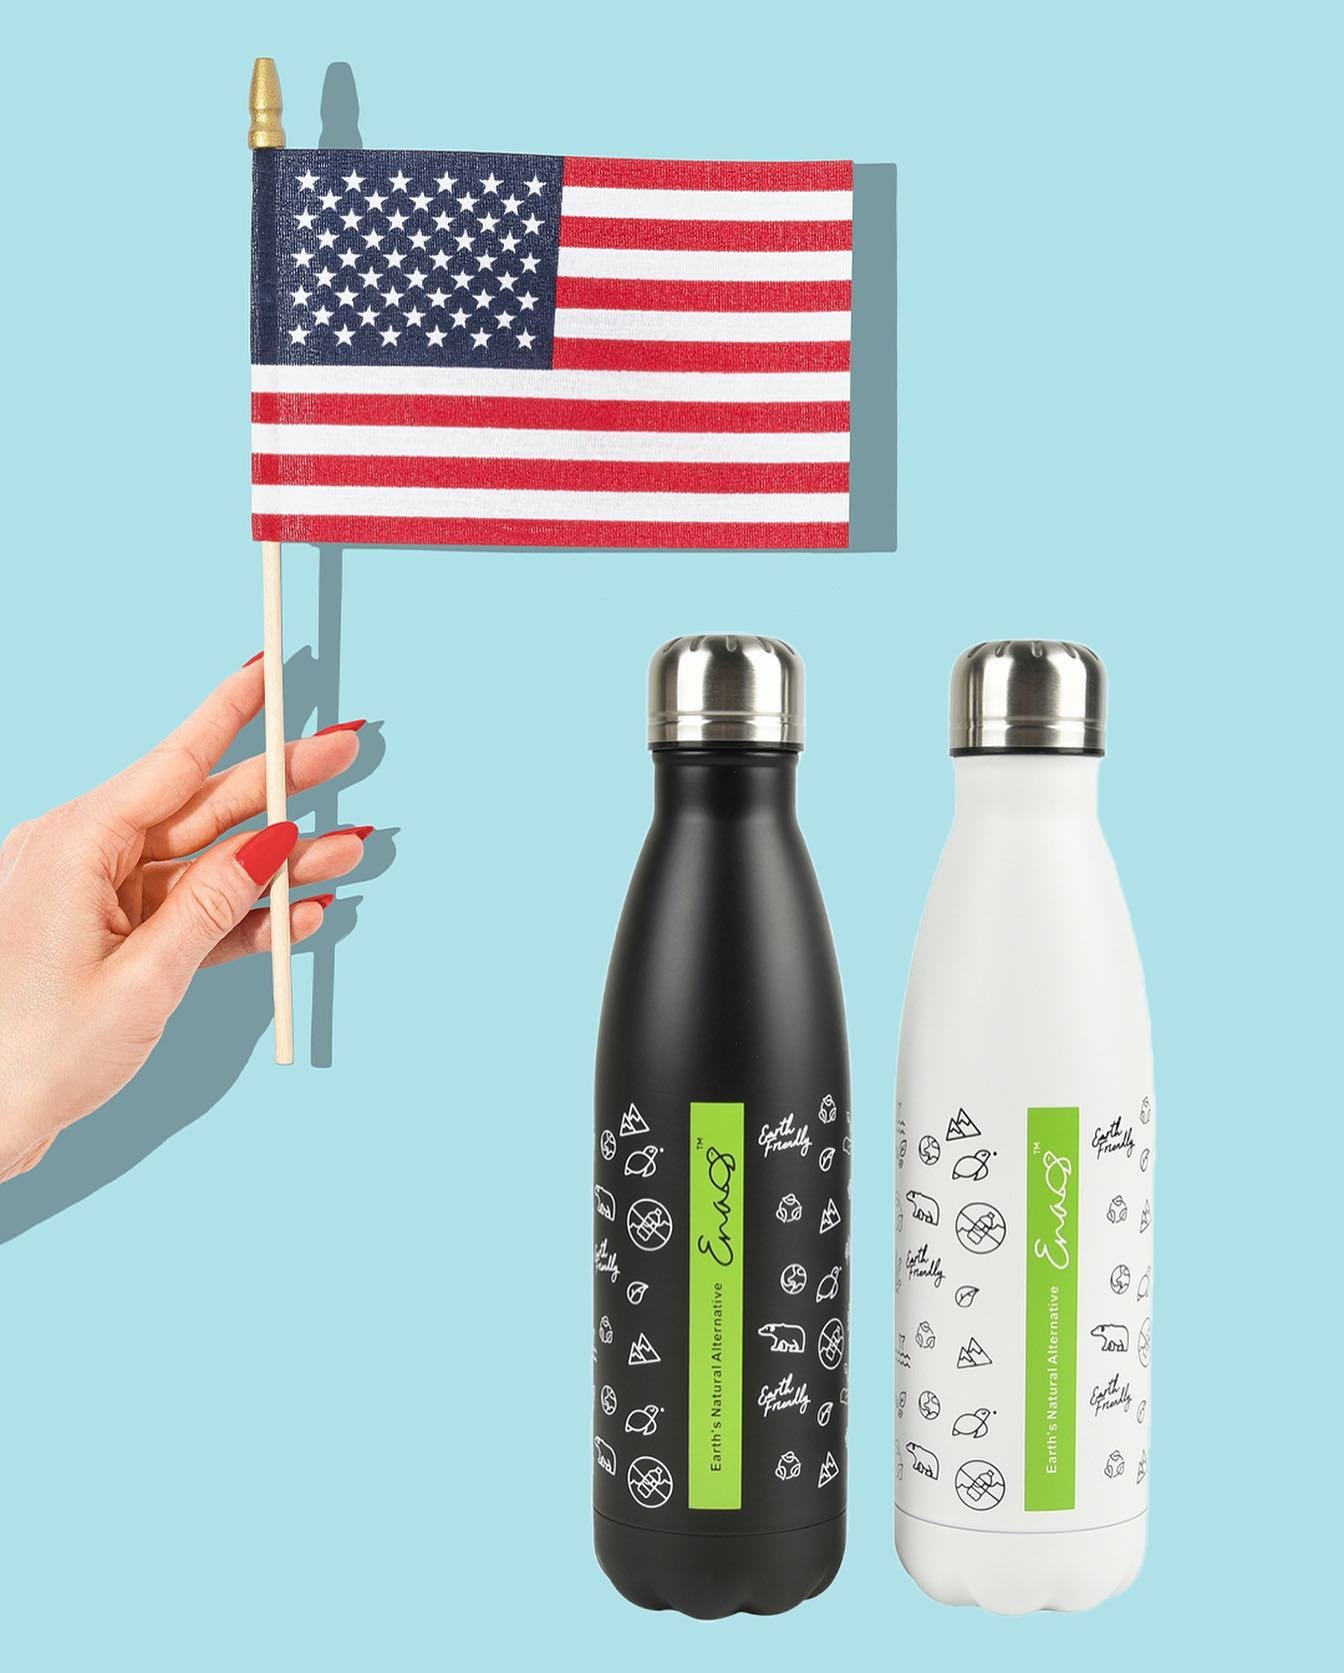 Welcoming summer!!! Get a FREE water bottle with every purchase above $39!*
The water bottle would be automatically added after you place the order!

👉Visit EnaEcoGoods.com and explore more eco-friendly options. Enjoy 10% off with code WELCOME10 on 